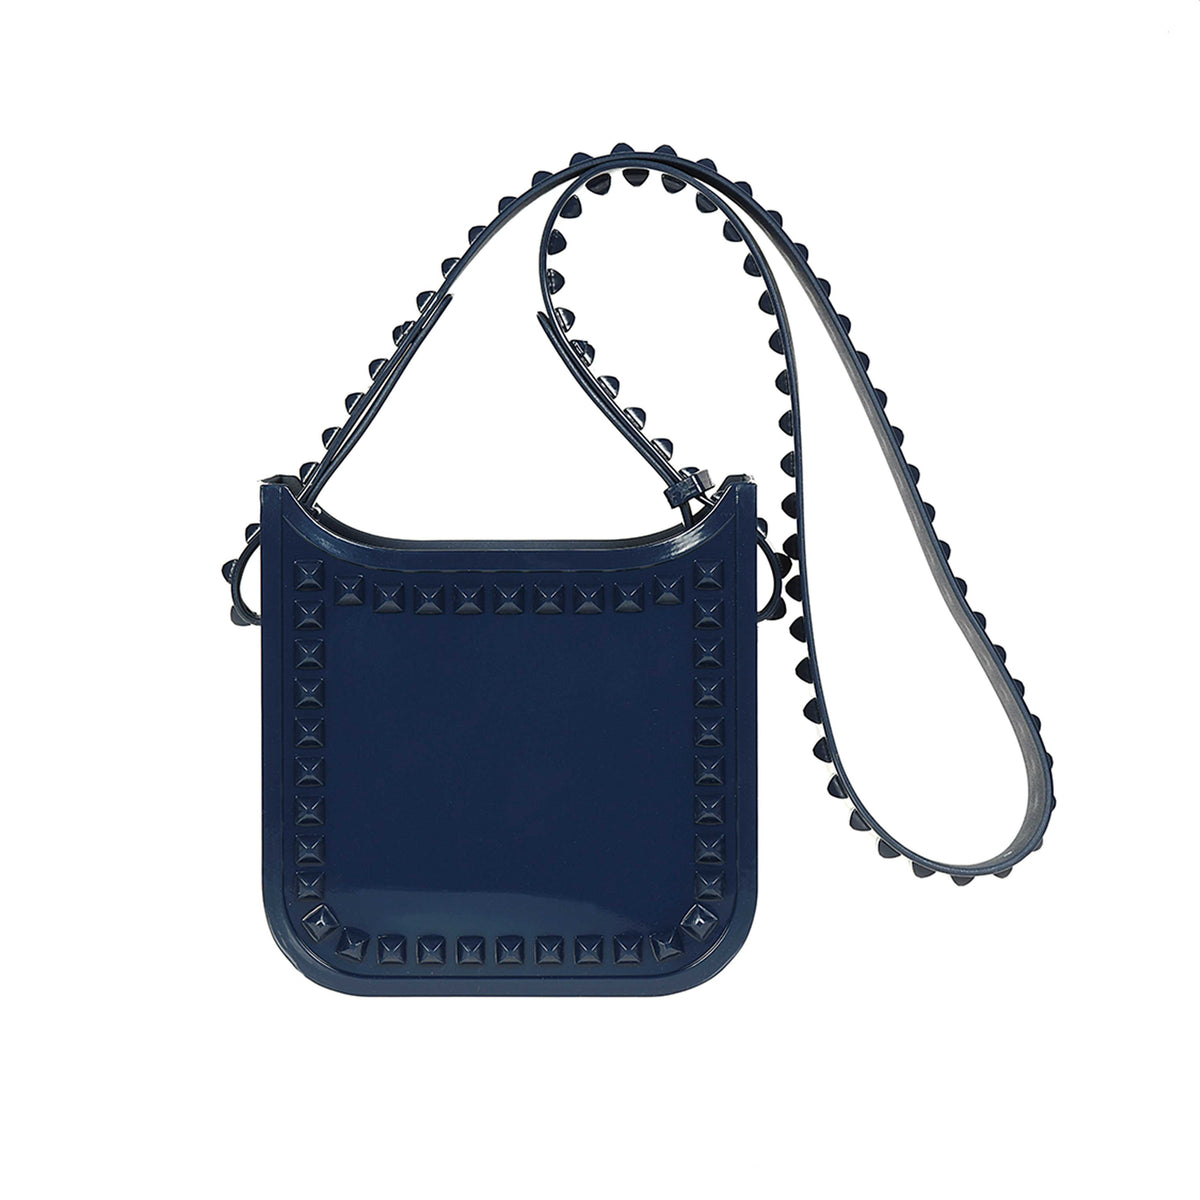 Navy blue studded Carmen Sol small purse which is made in Italy